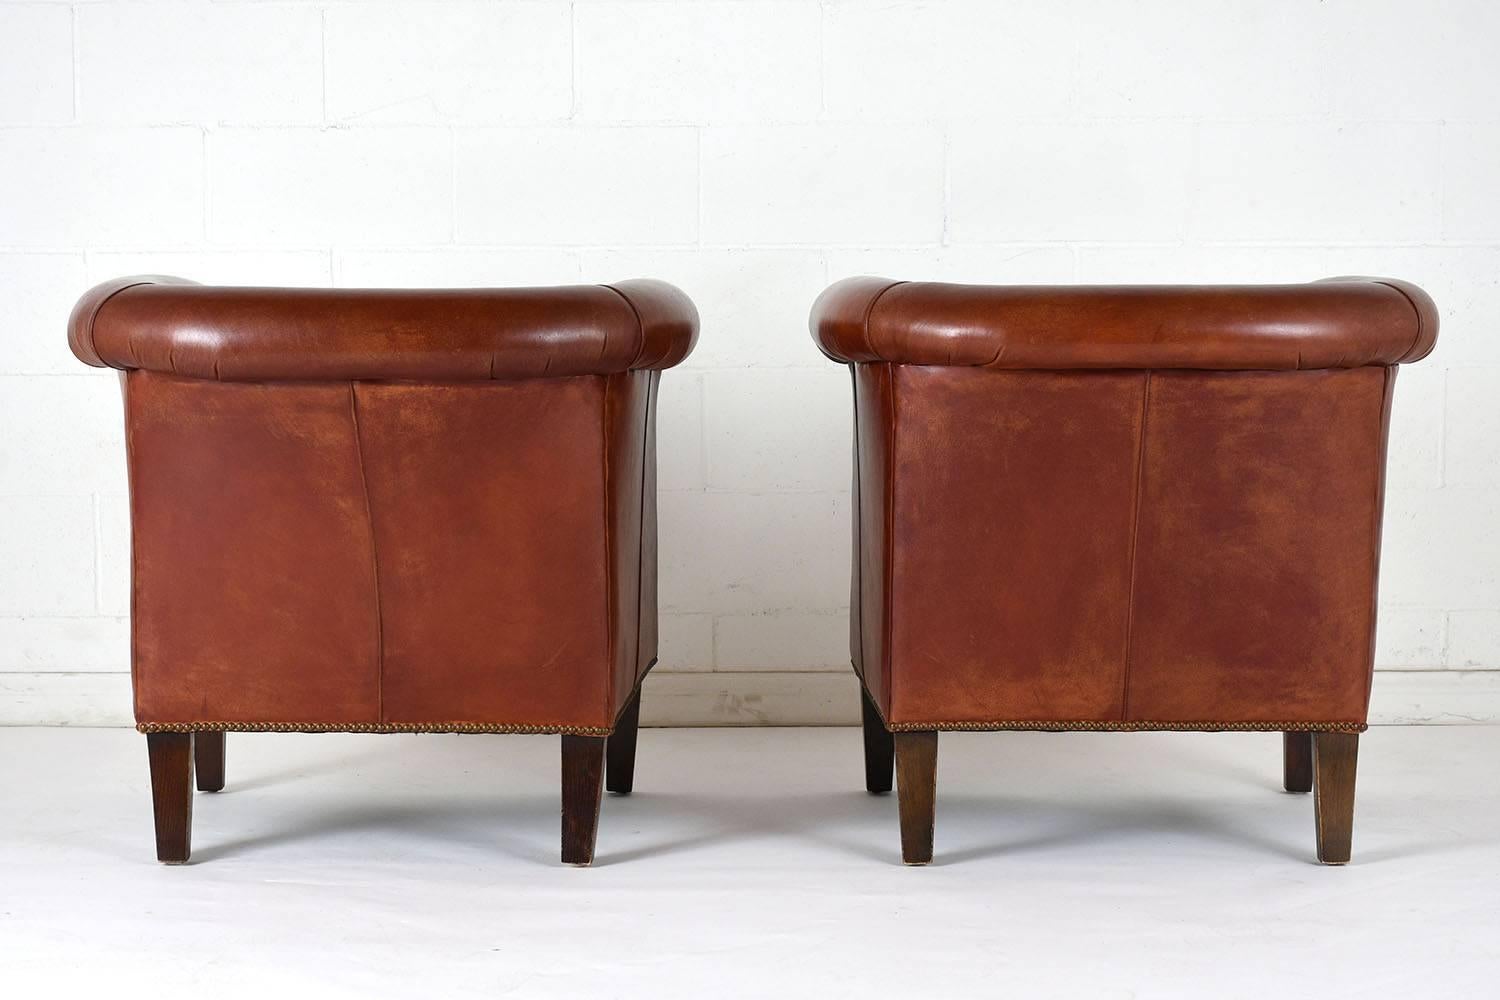 Hand-Crafted Pair of Regency-Style Bernhardt Leather Club Chairs